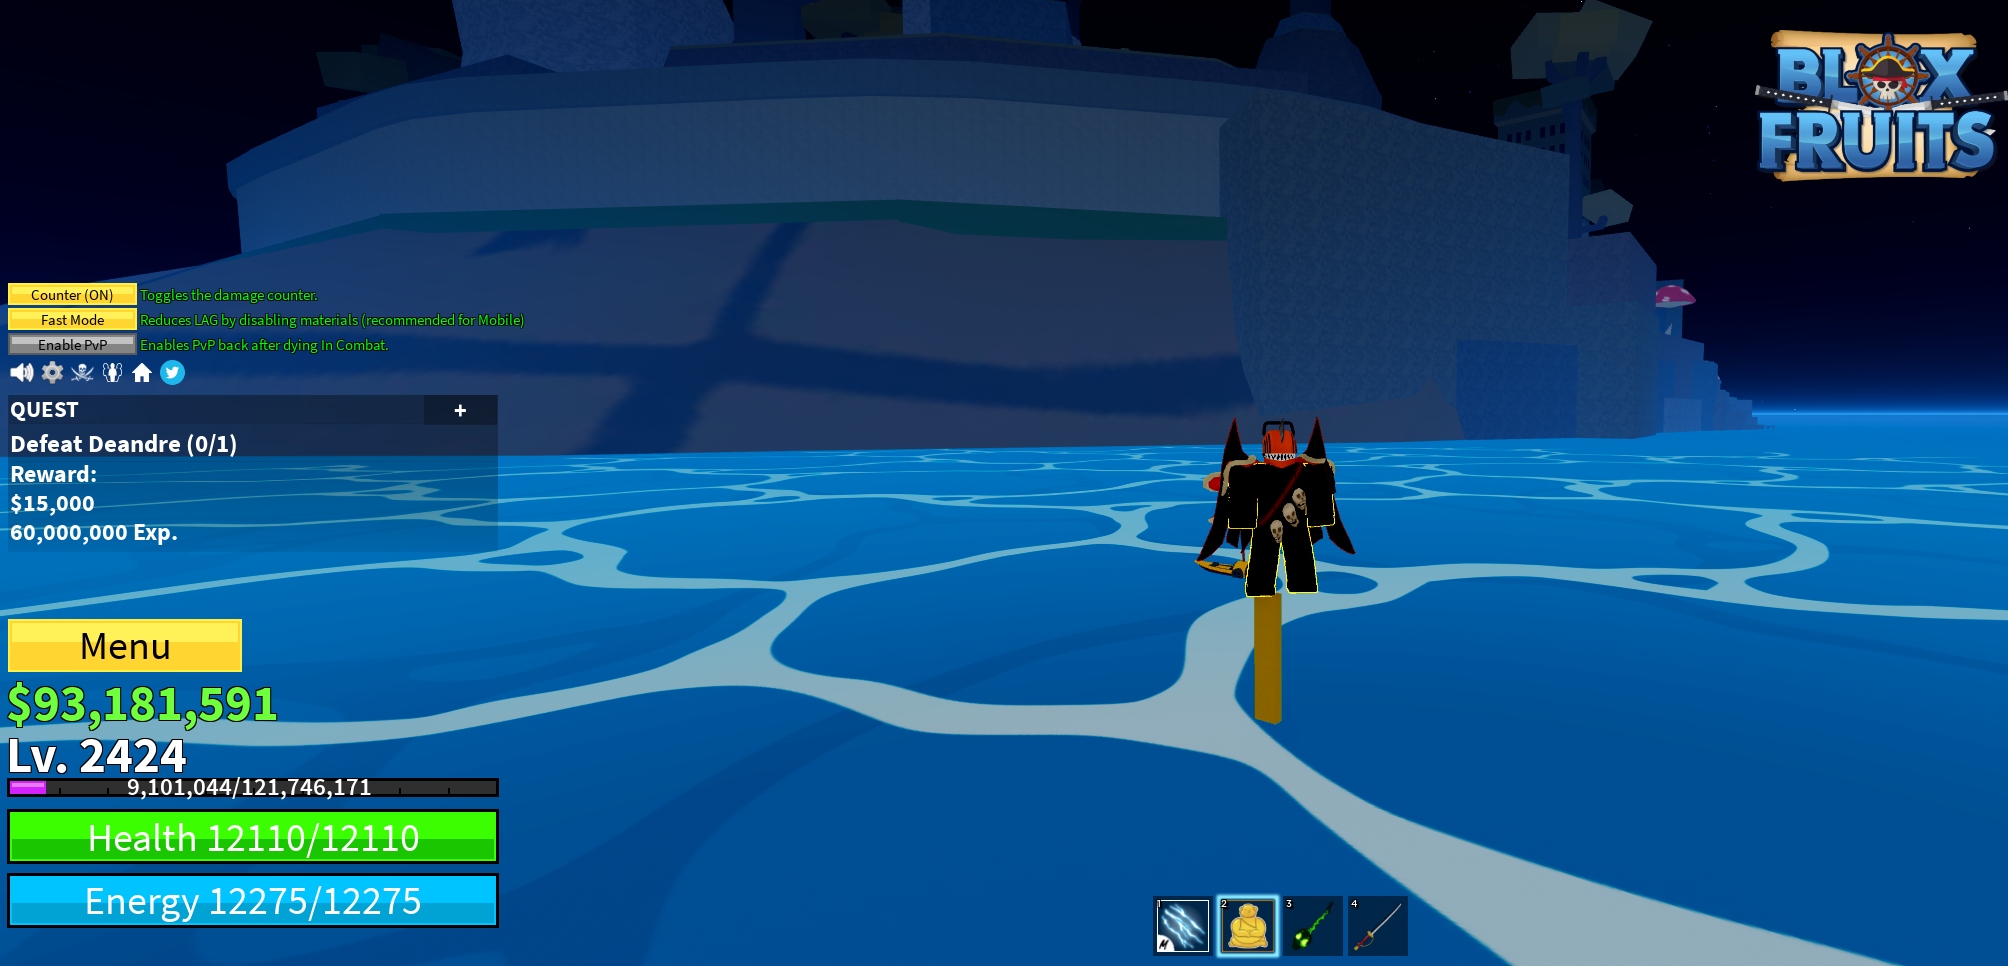 How to Go to Third Sea in Blox Fruits 